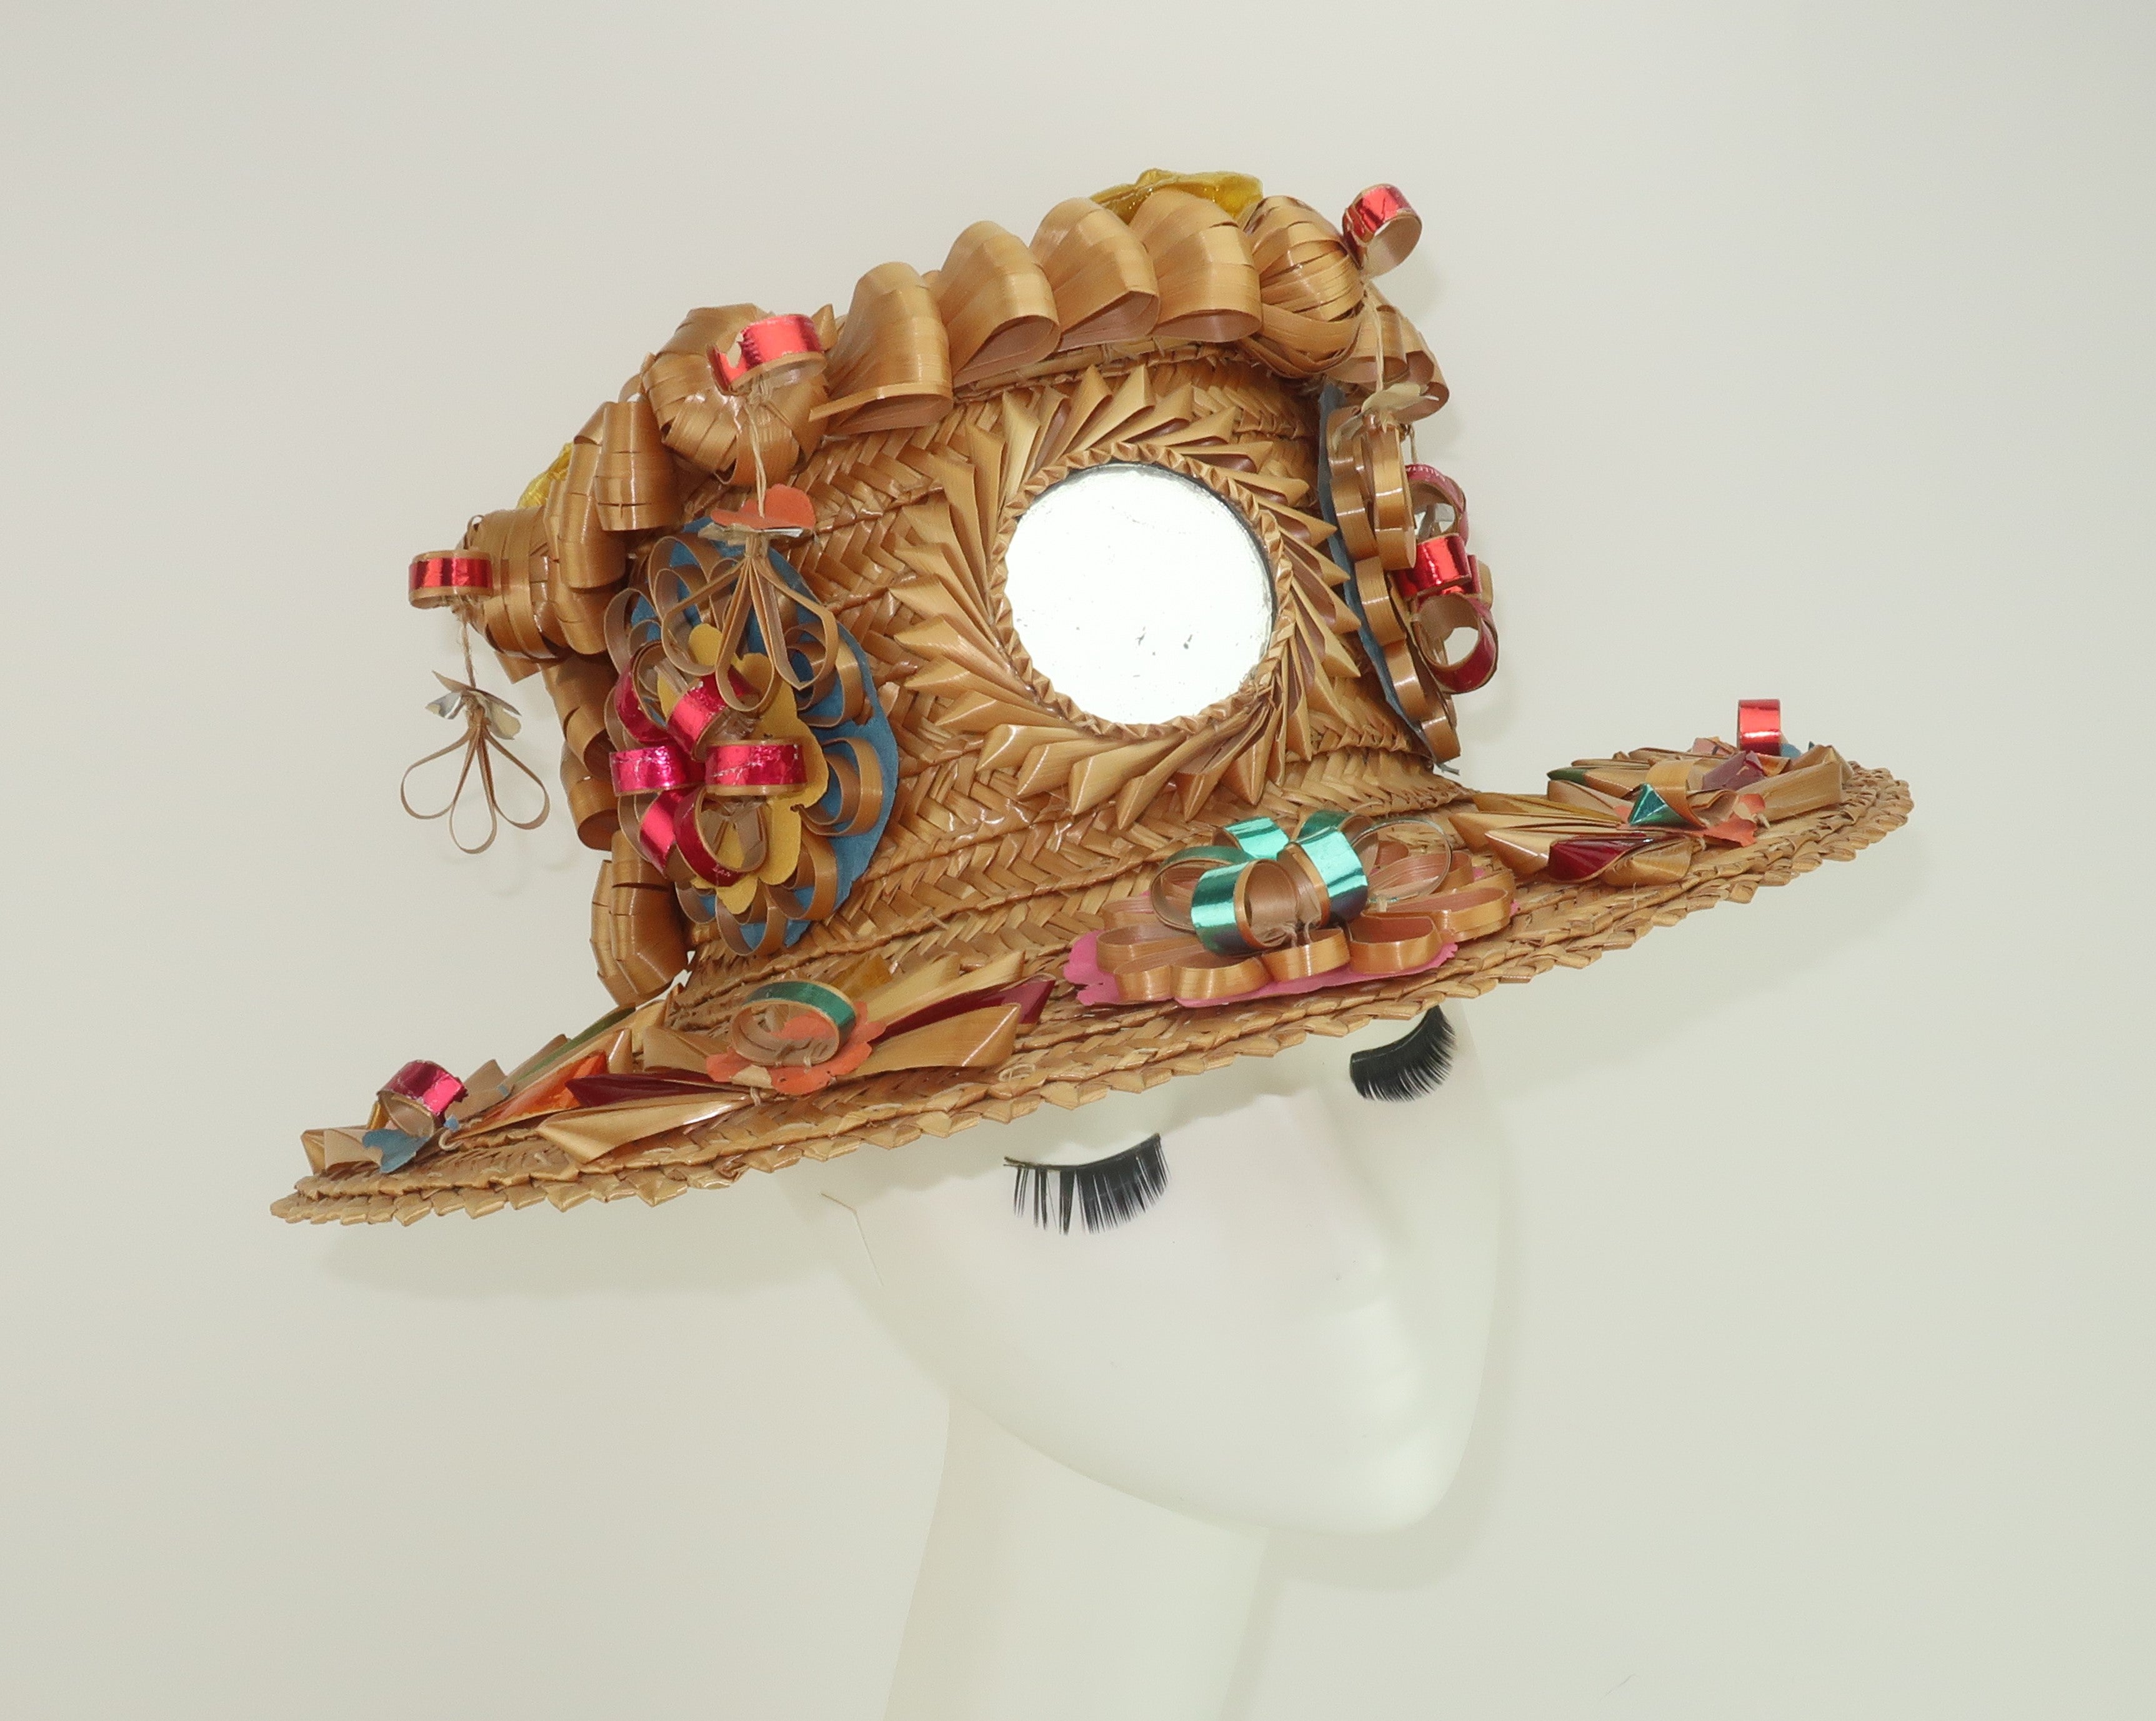 A festive straw hat embellished with curlicues, rosettes, dangles and a sun shaped mirror in the folkloric tradition of Spanish Basque country.  A closer look at the fun decor reveals foil candy and coffee labels used to form some of the curlicues. 